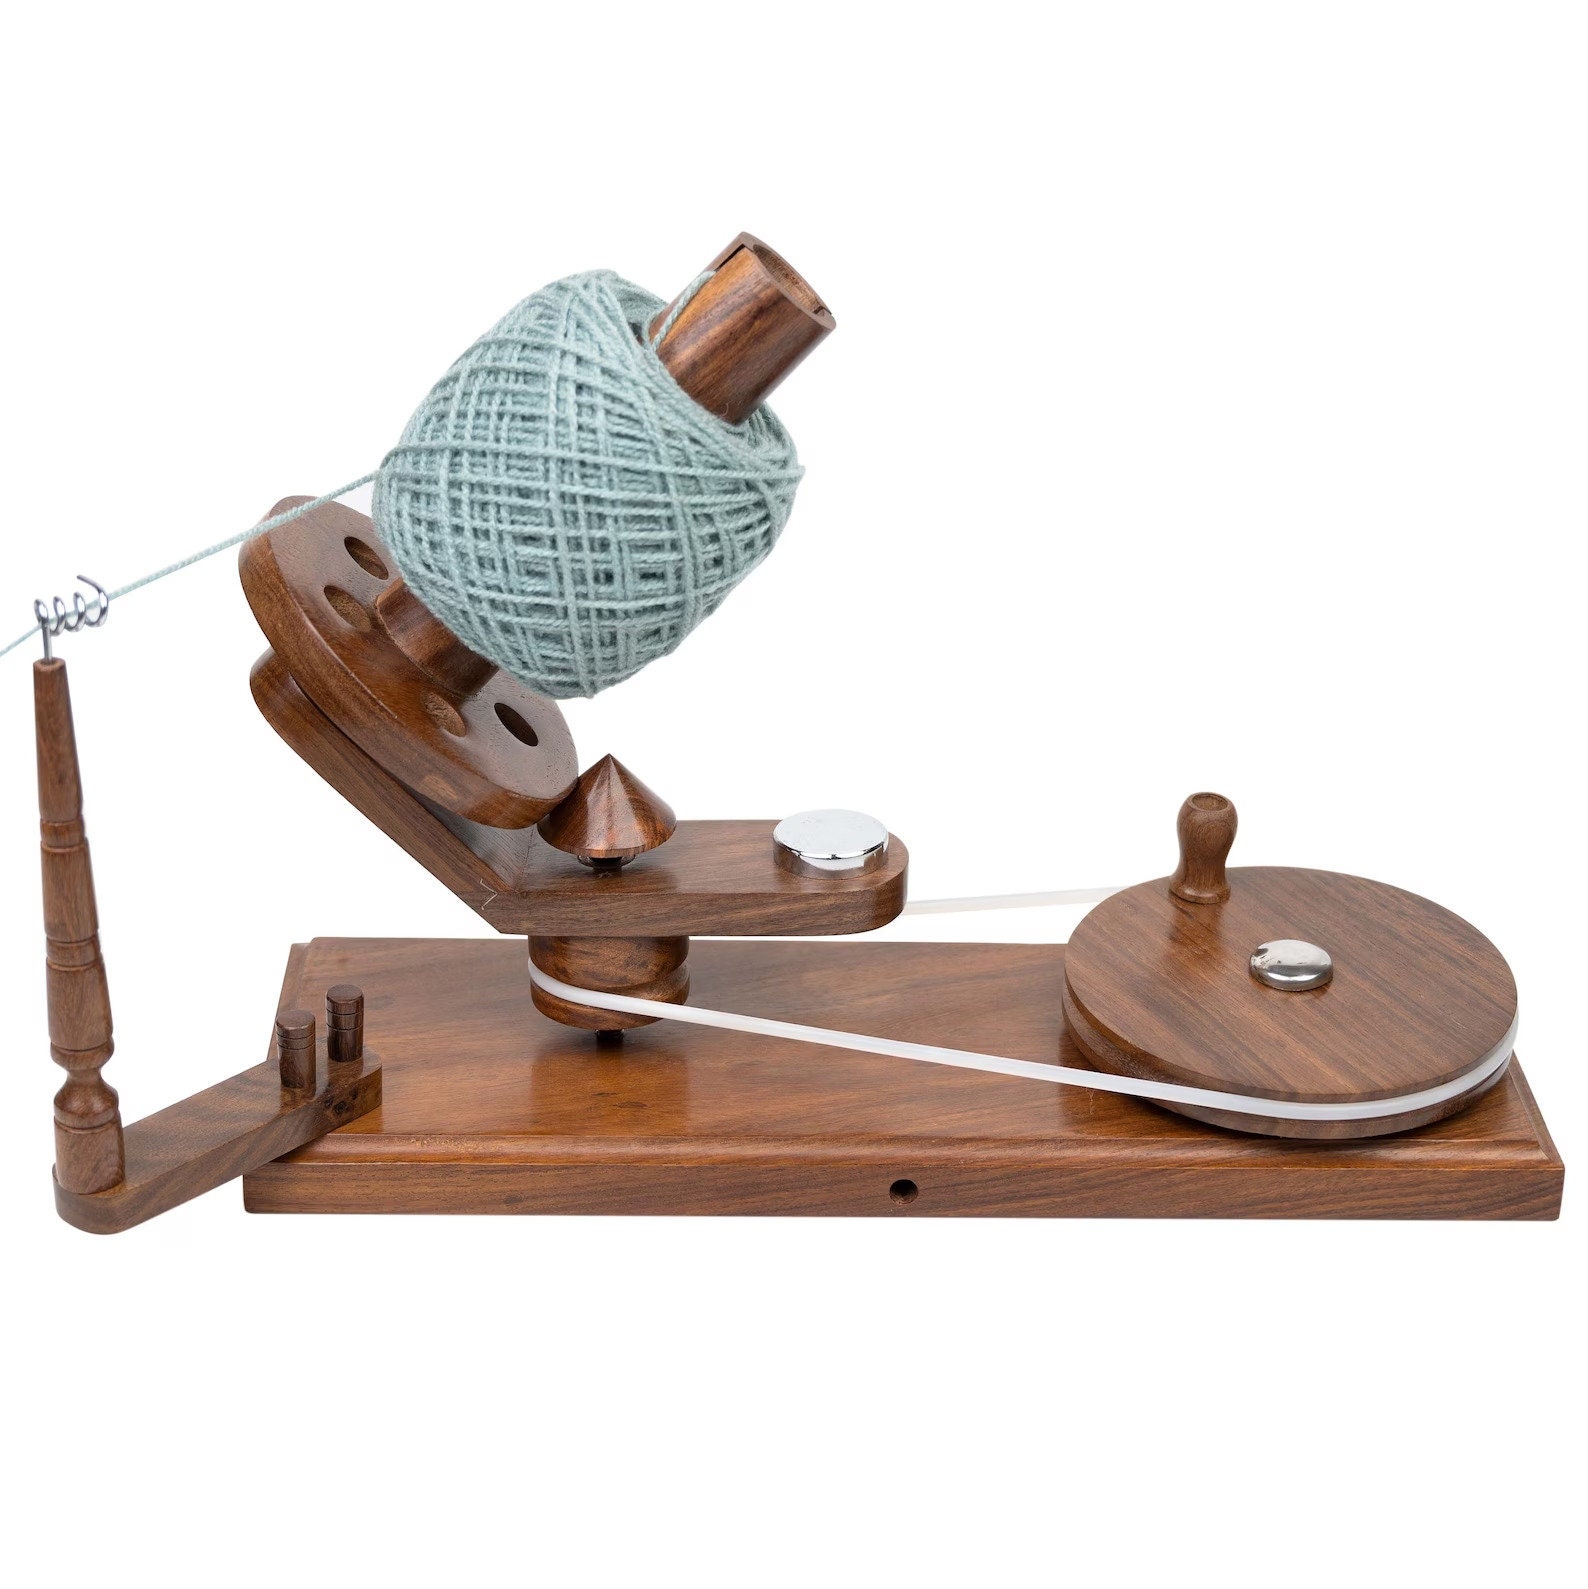 Wooden Yarn Ball Winder - Handcrafted Large Yarn Winder for Knitting &  Crocheting - Hand Operated Heavy Duty Natural Ball Winder - ARTISANS CRAFT